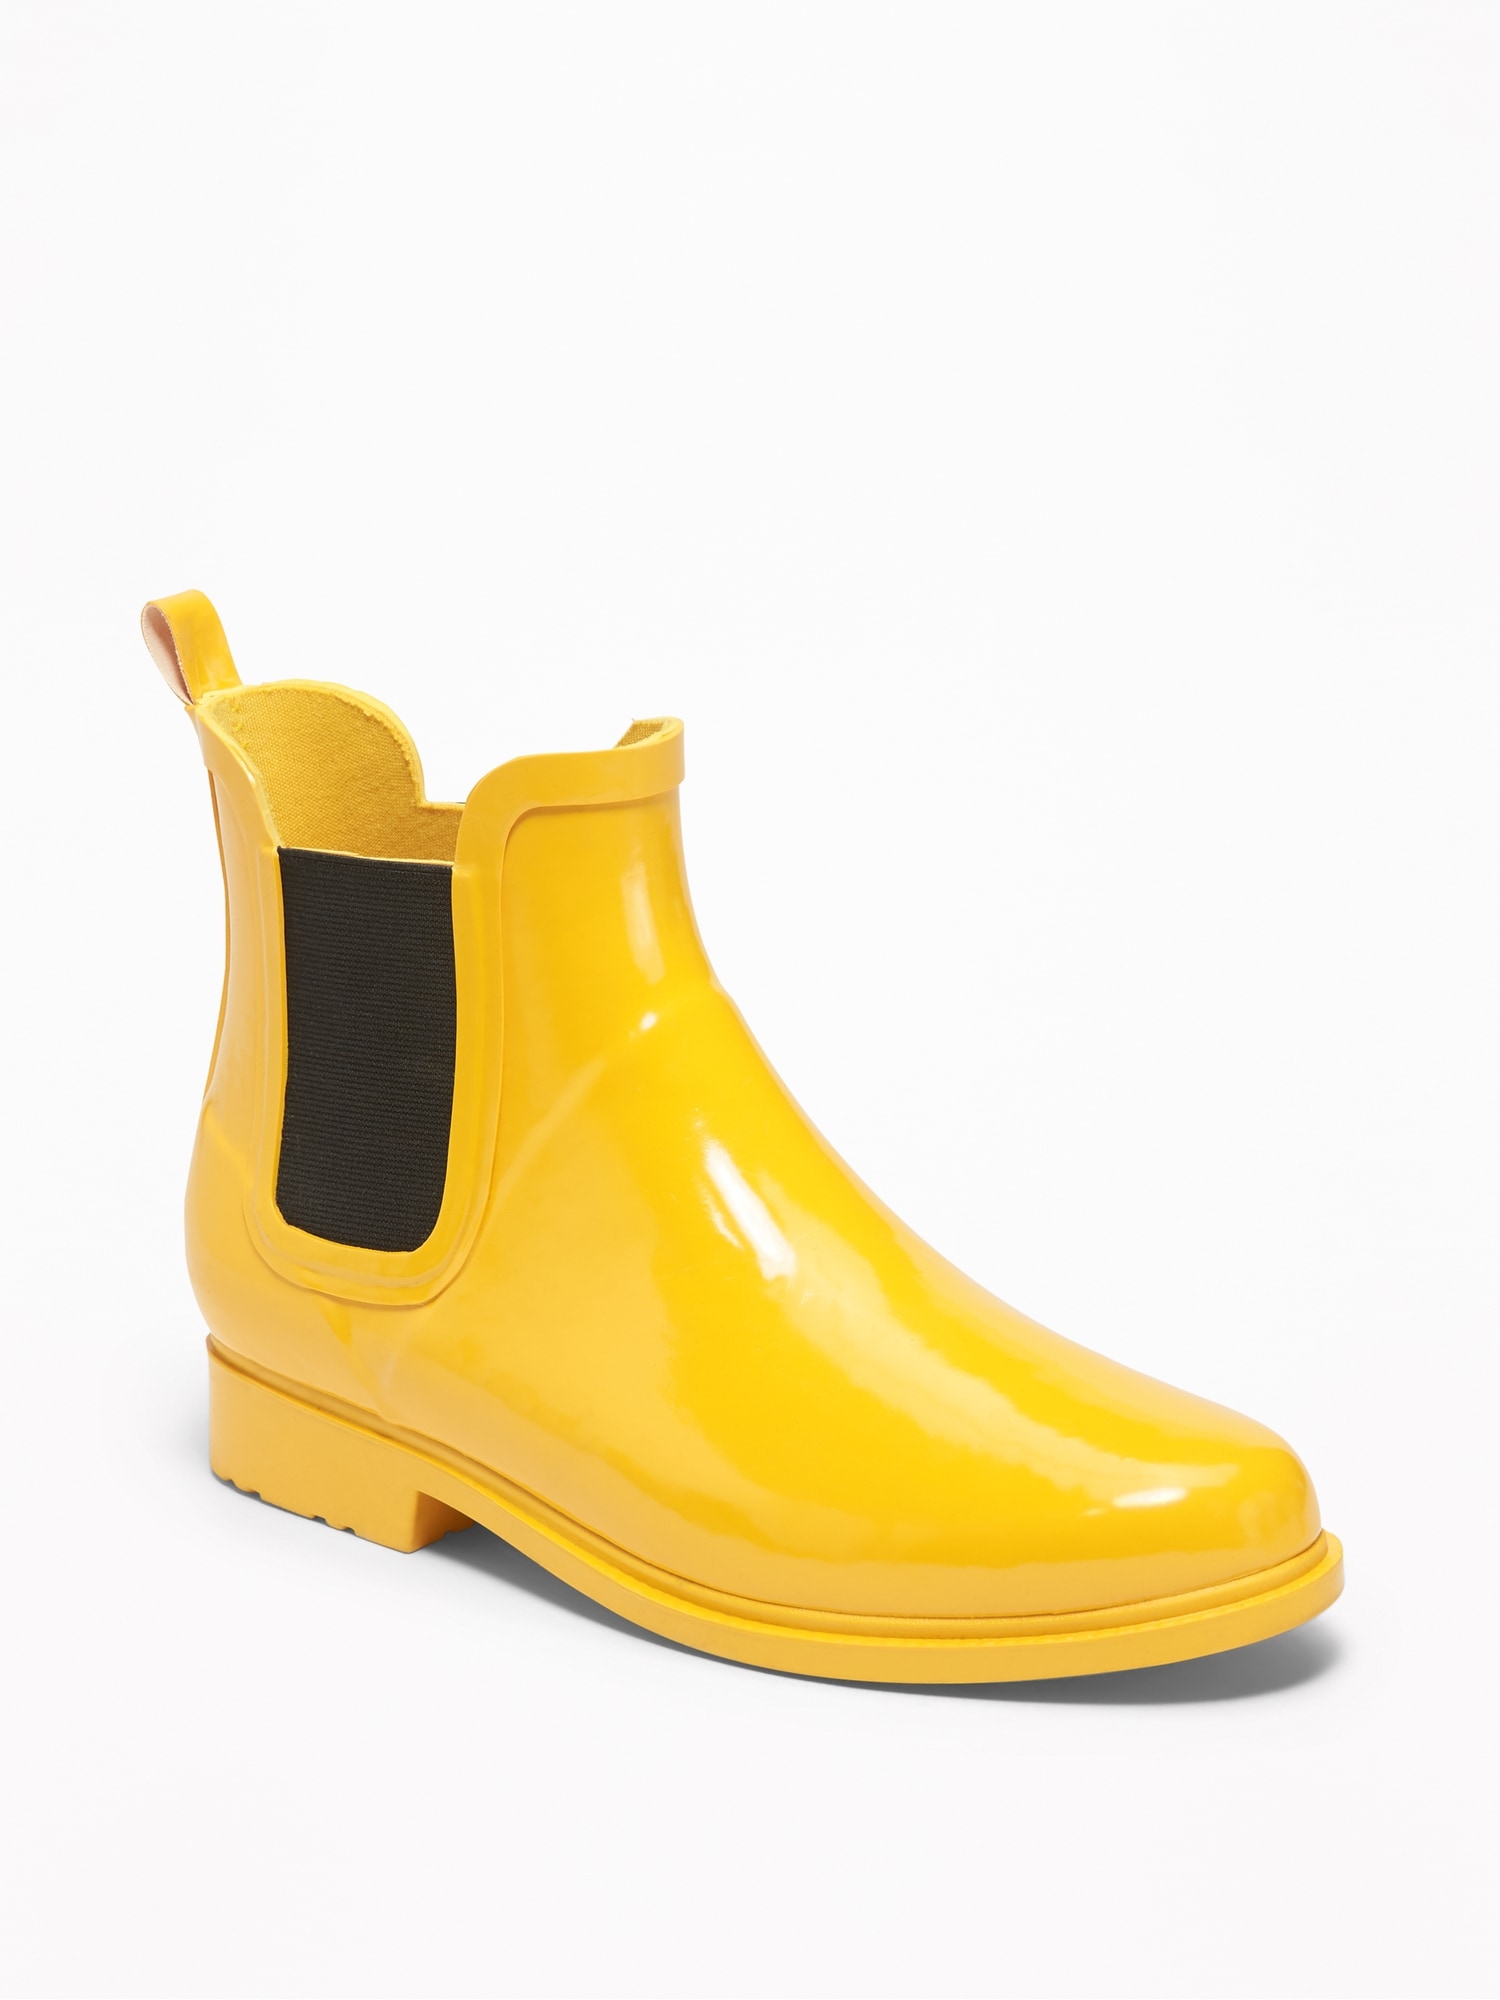 old navy rubber boots